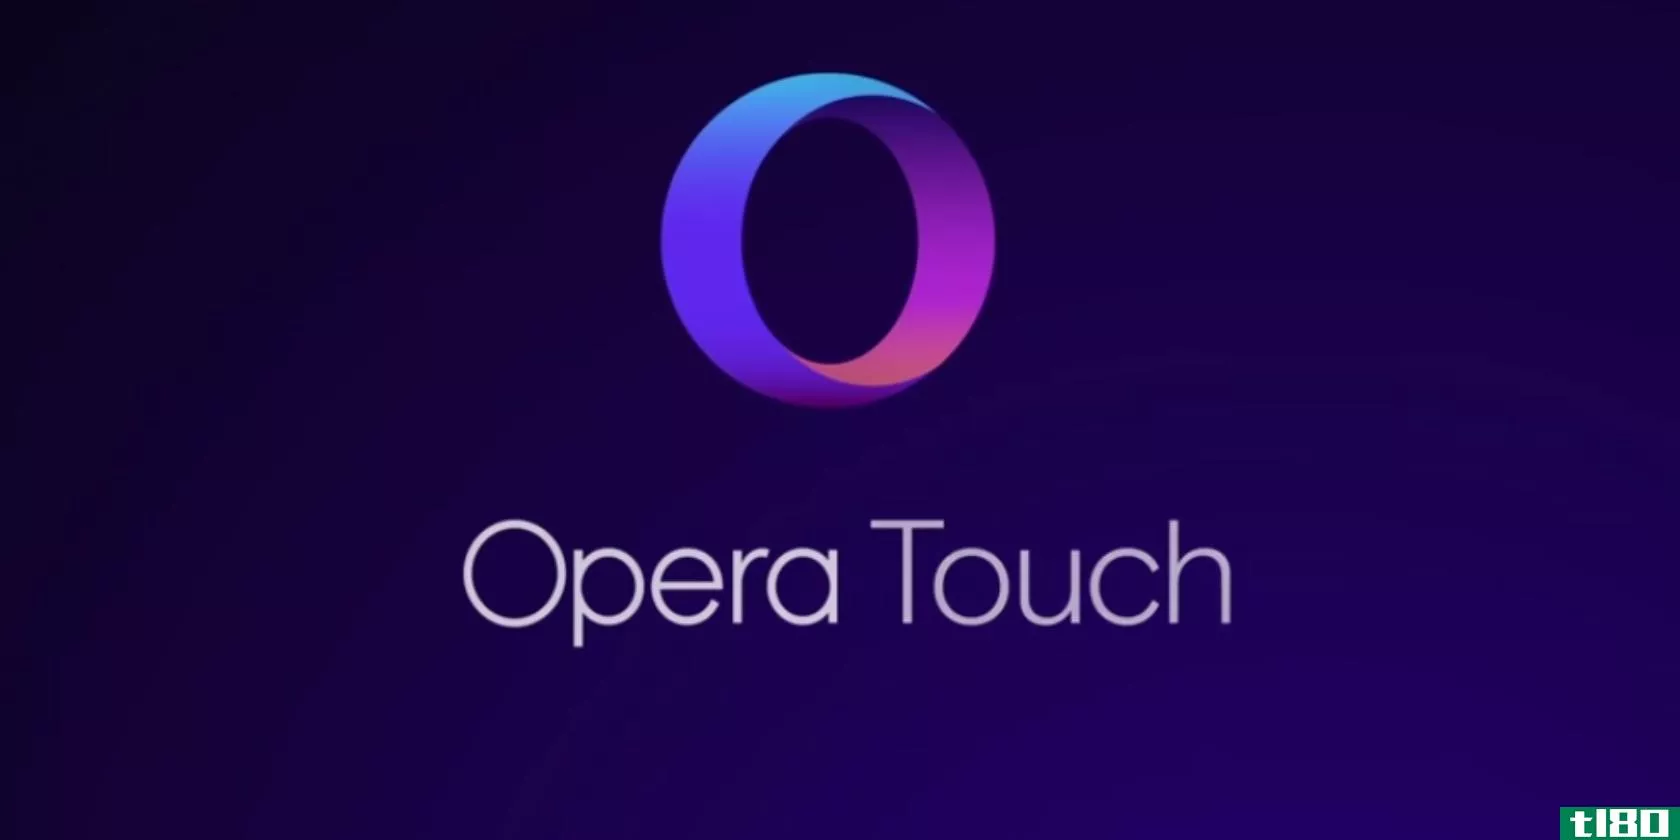 opera-touch-iphone-logo